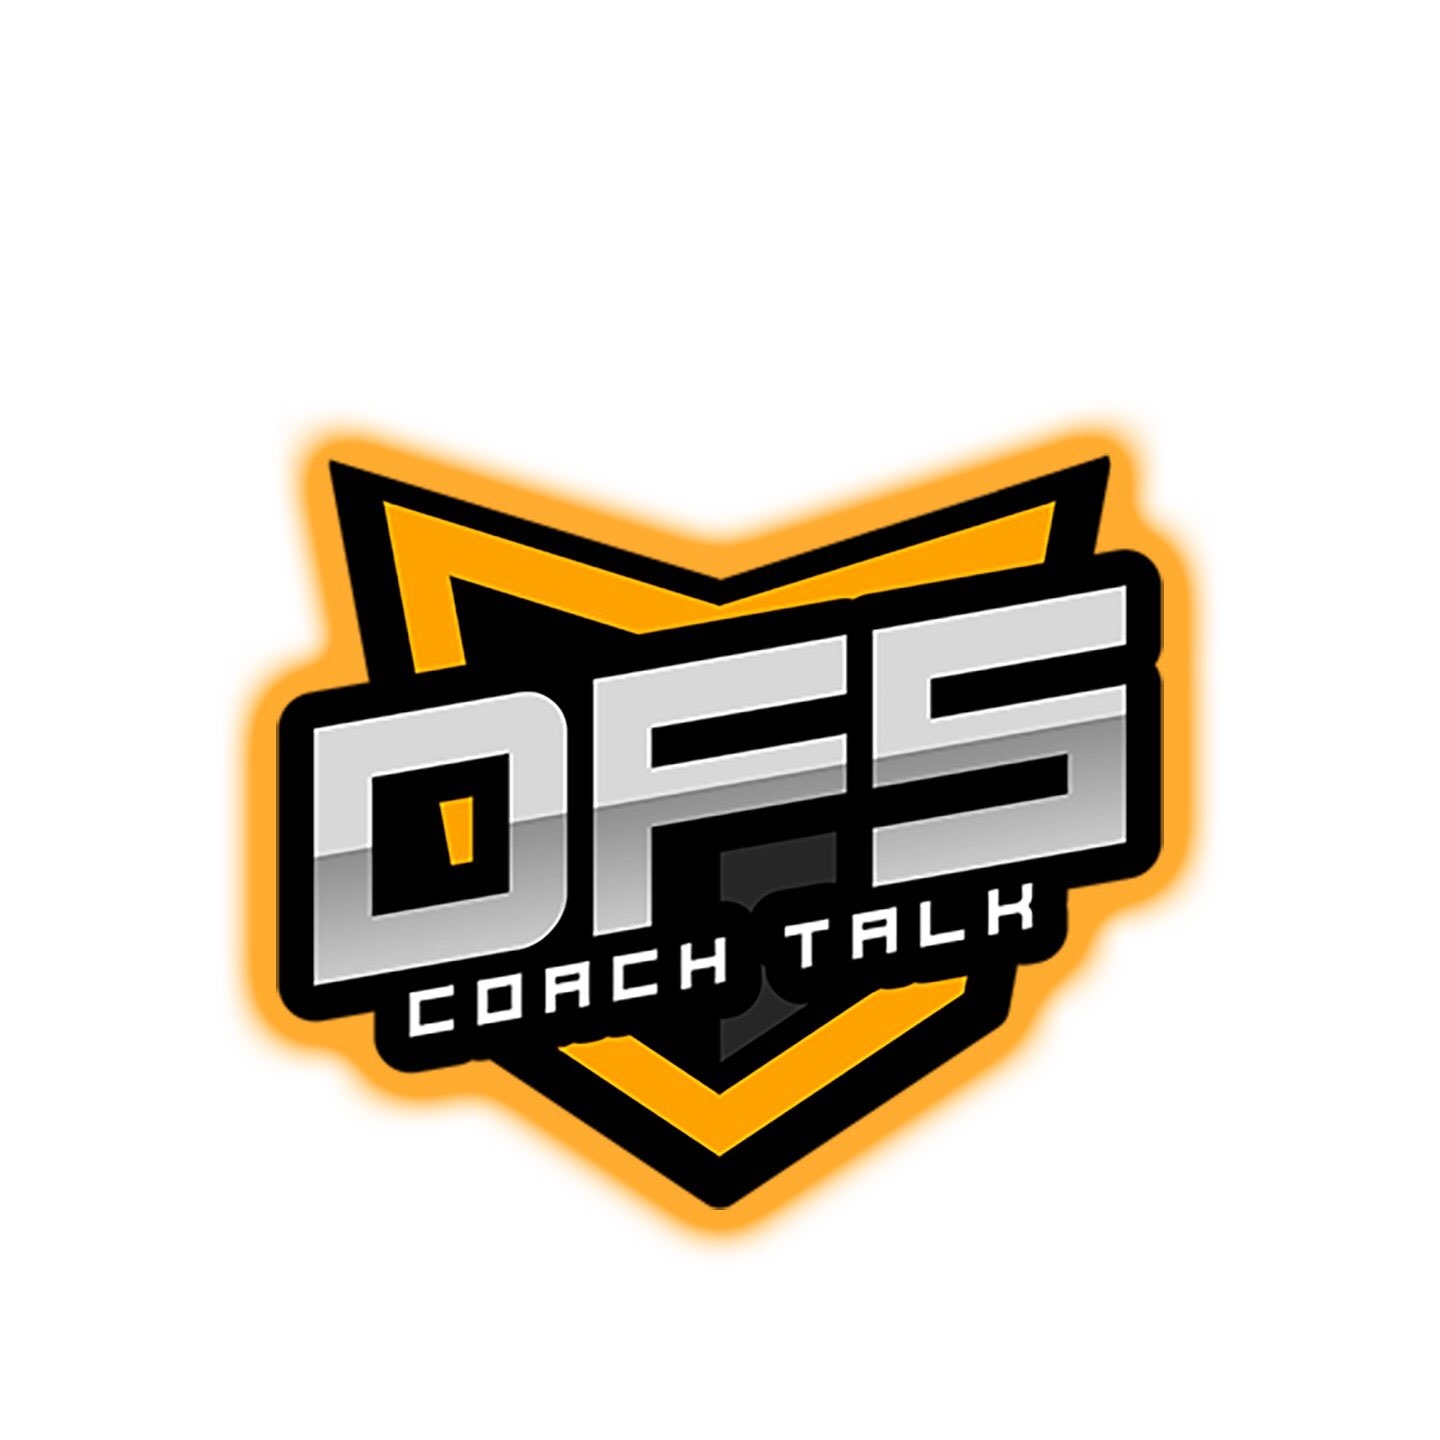 TOP RB PICKS ON DRAFTKINGS & FANDUEL FOR NFL DFS WEEK 8 WITH DFS COACH TALK!